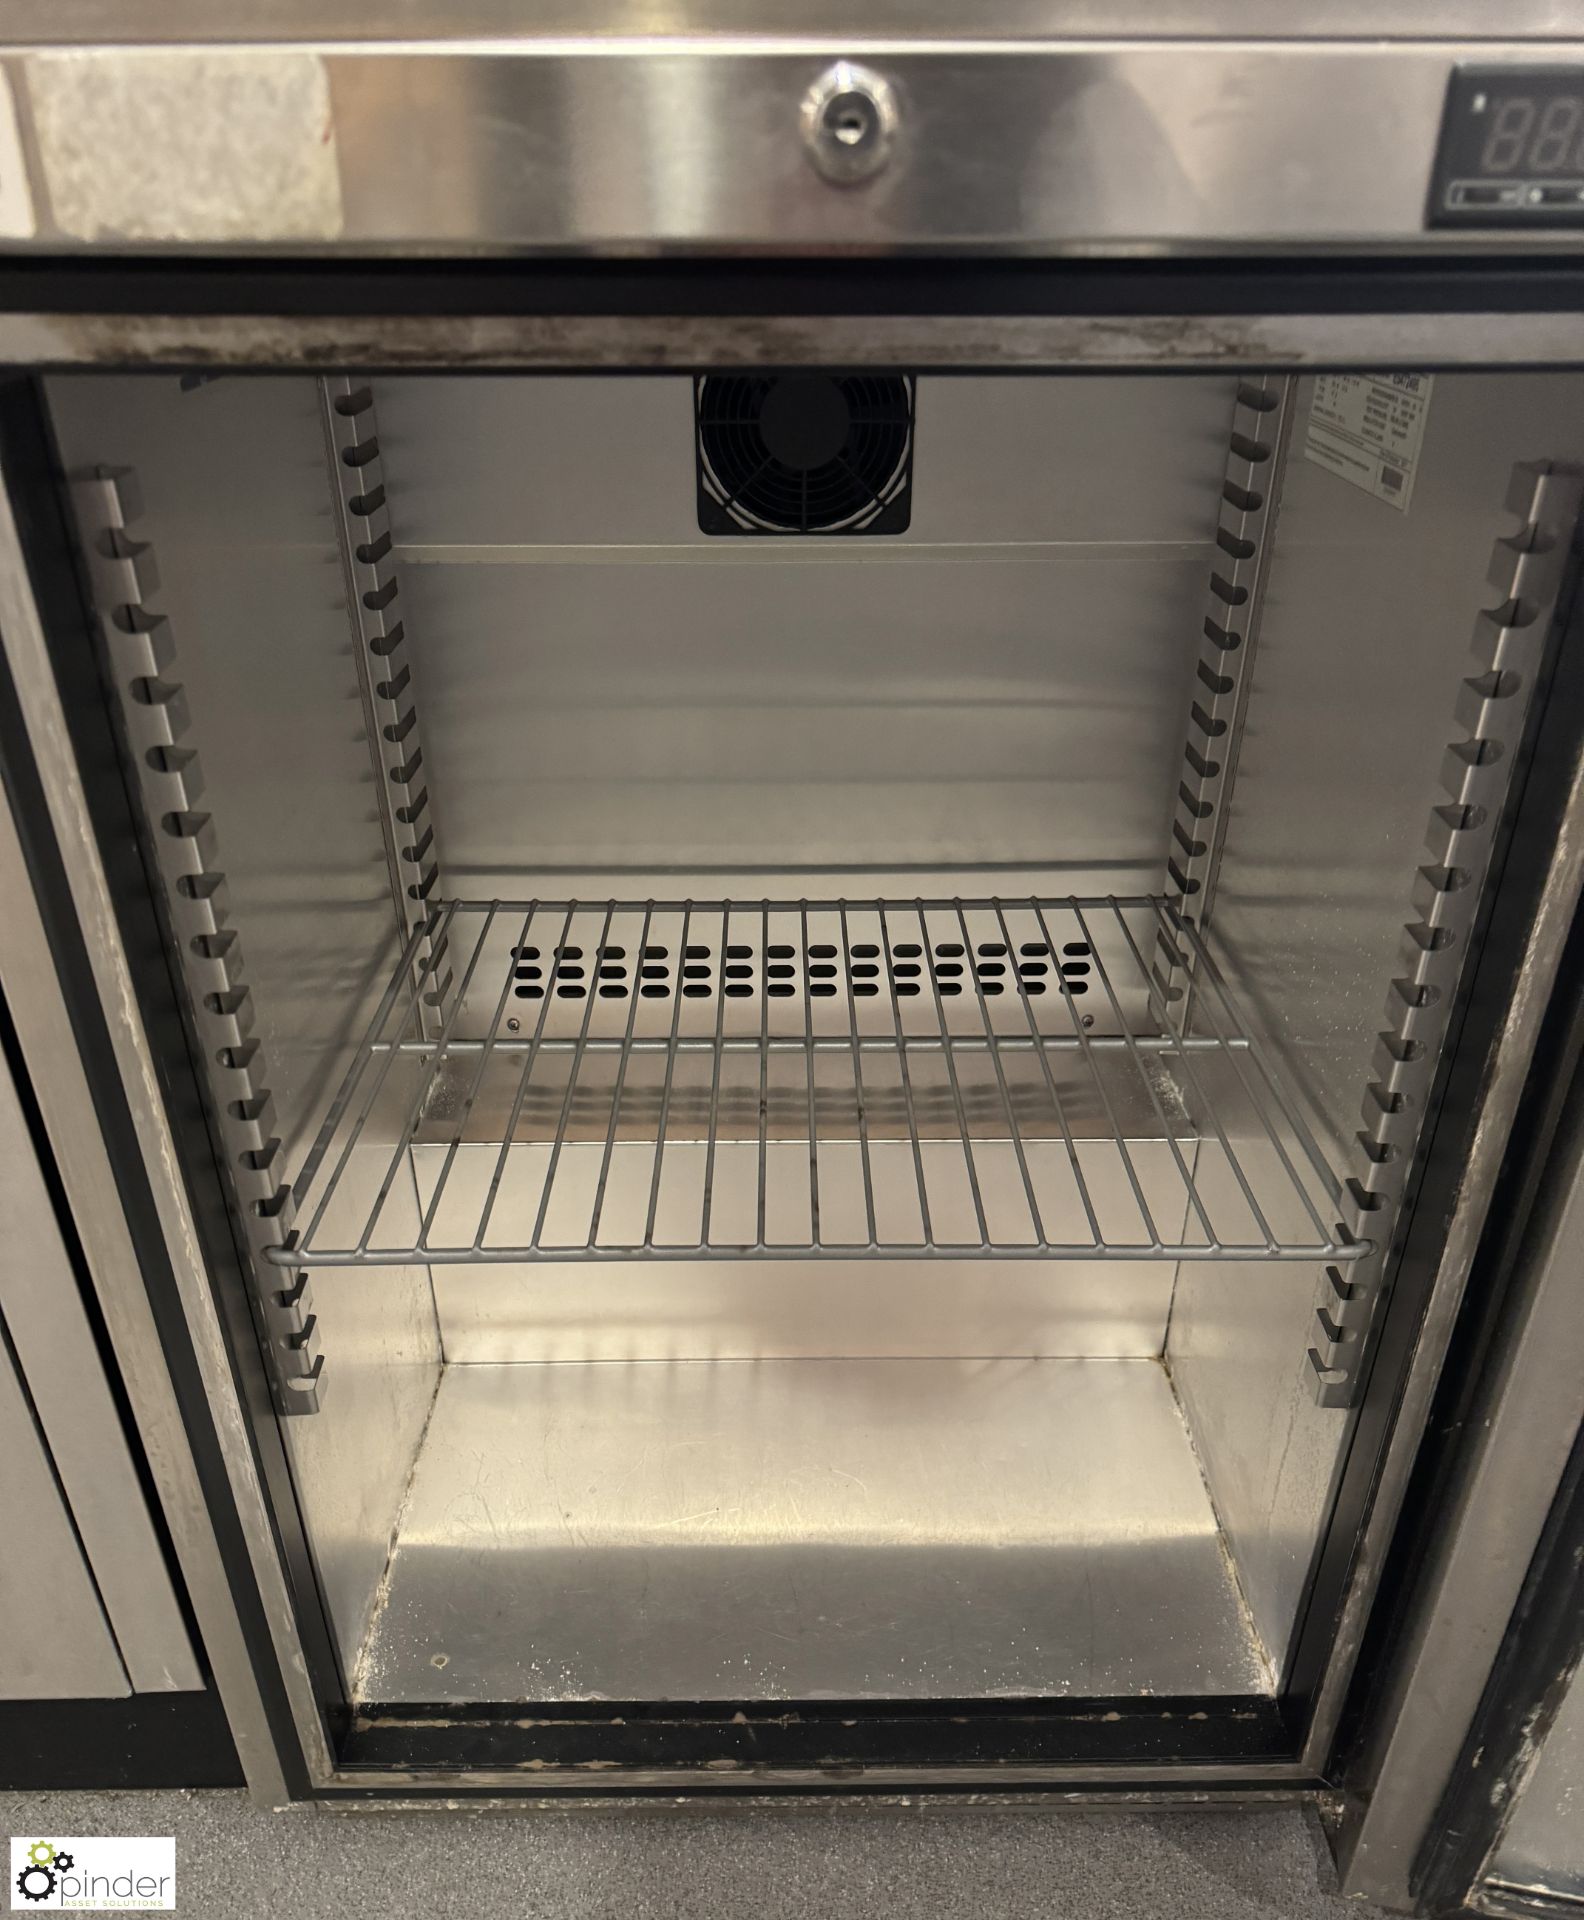 Foster stainless steel under counter Fridge, 240volts (location in building - level 11 café area) - Image 2 of 3